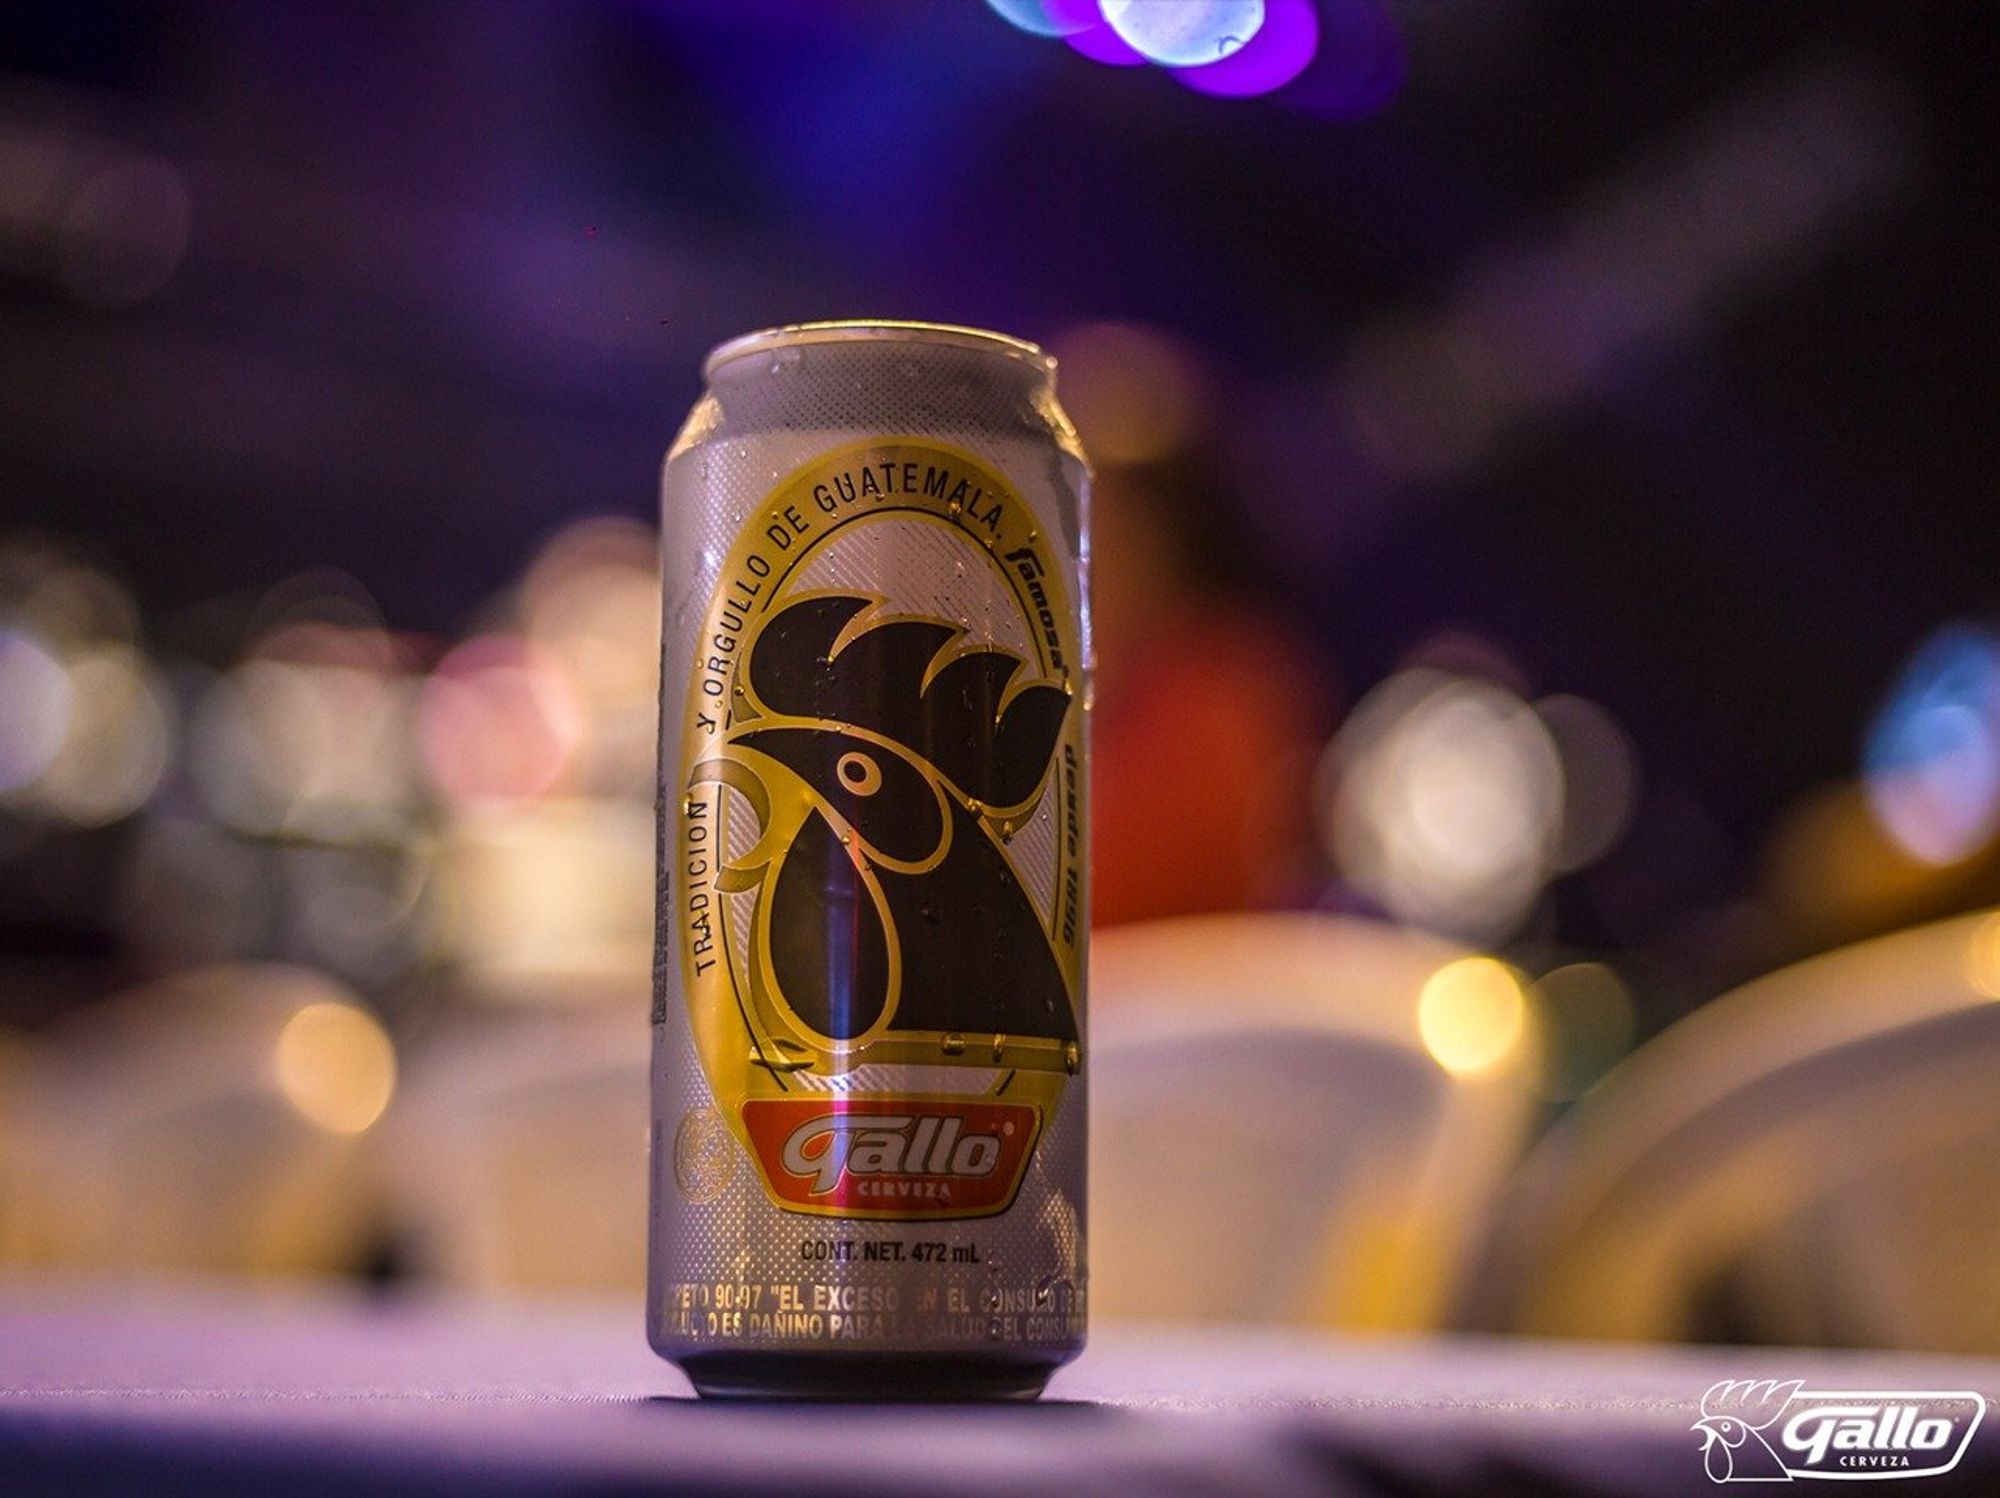 A can of 'Gallo,' the Guatemalan beer, rests on a bar table.